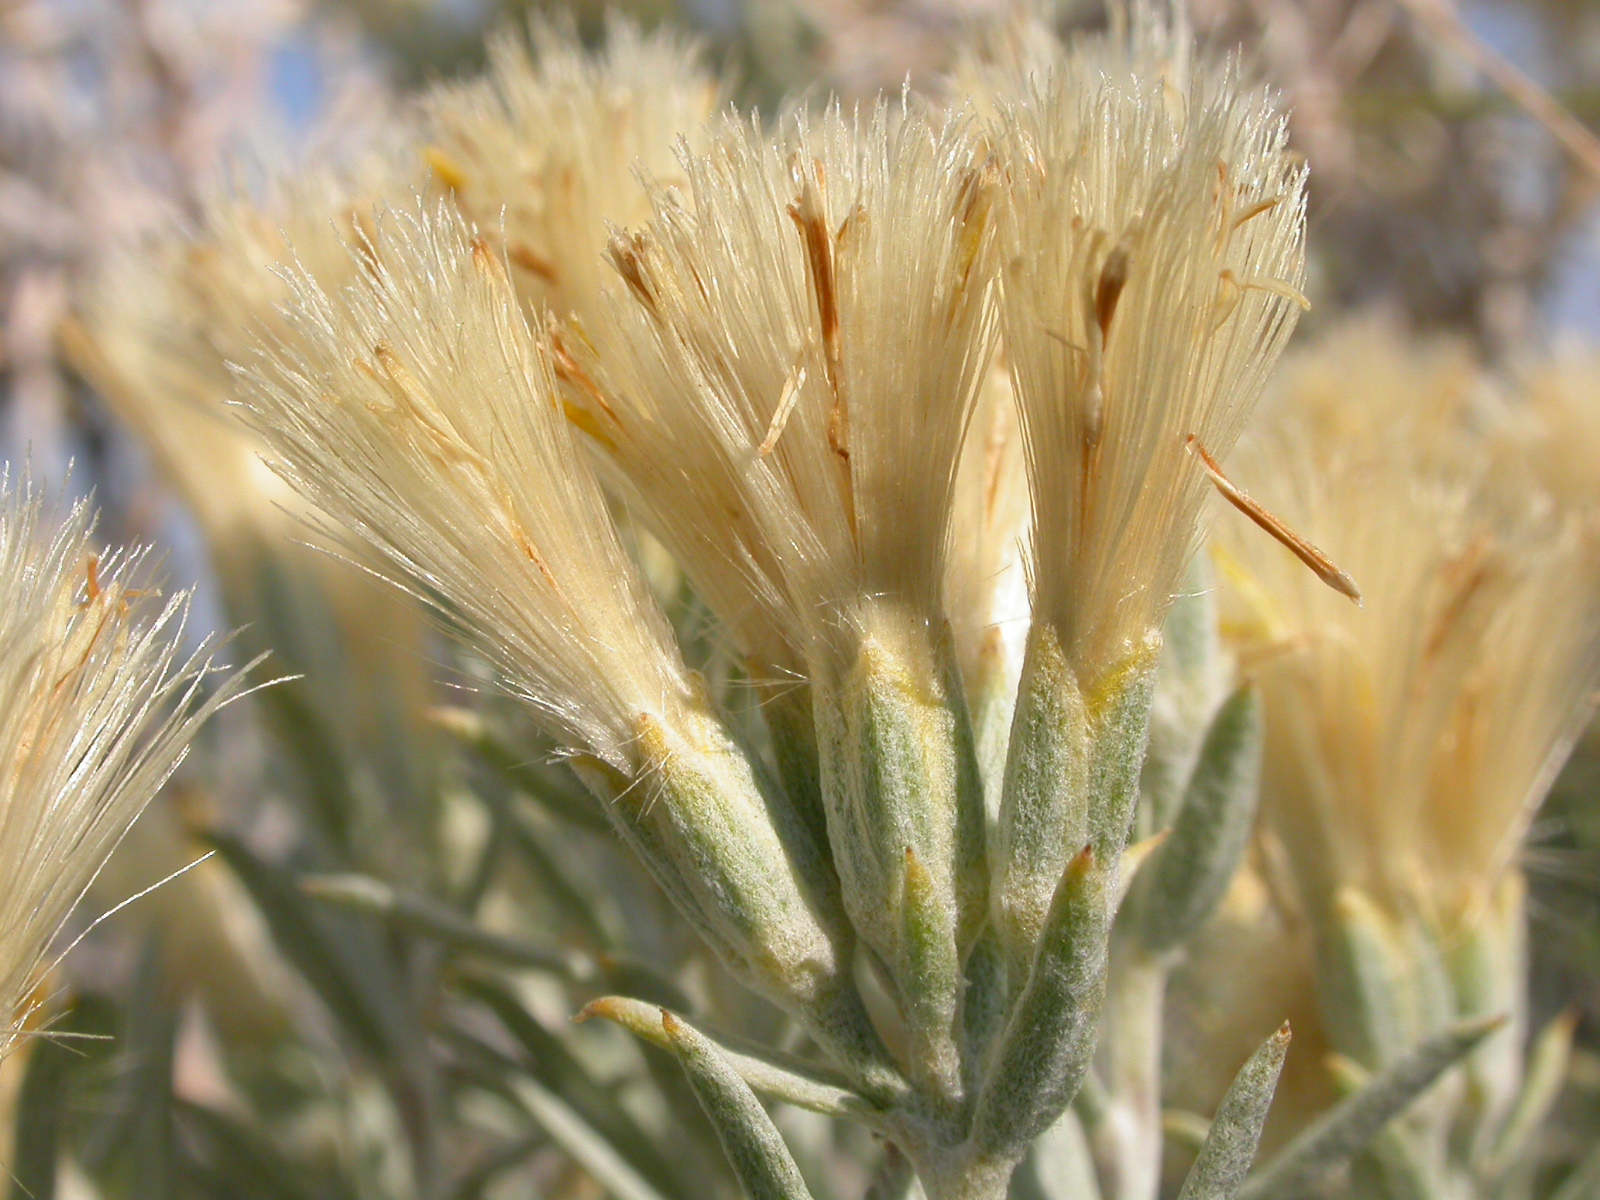 Dry flowers that have become like little paintbrushes because of their tufty seeds